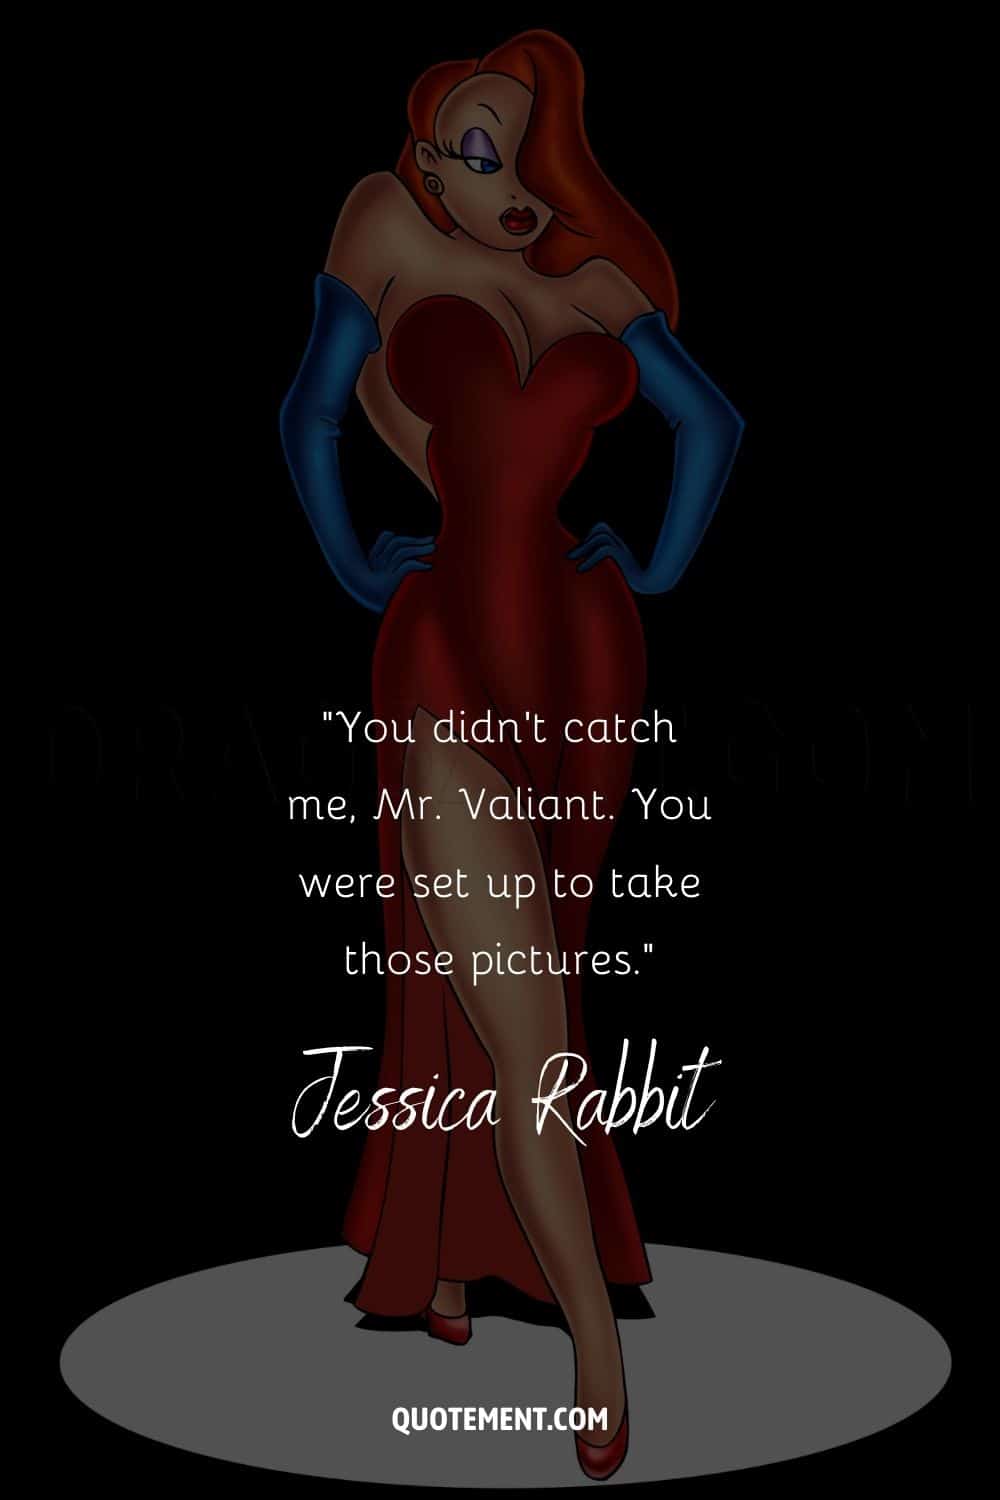 quote by Jessica Rabbit represented by Jessica Rabbit illustration
